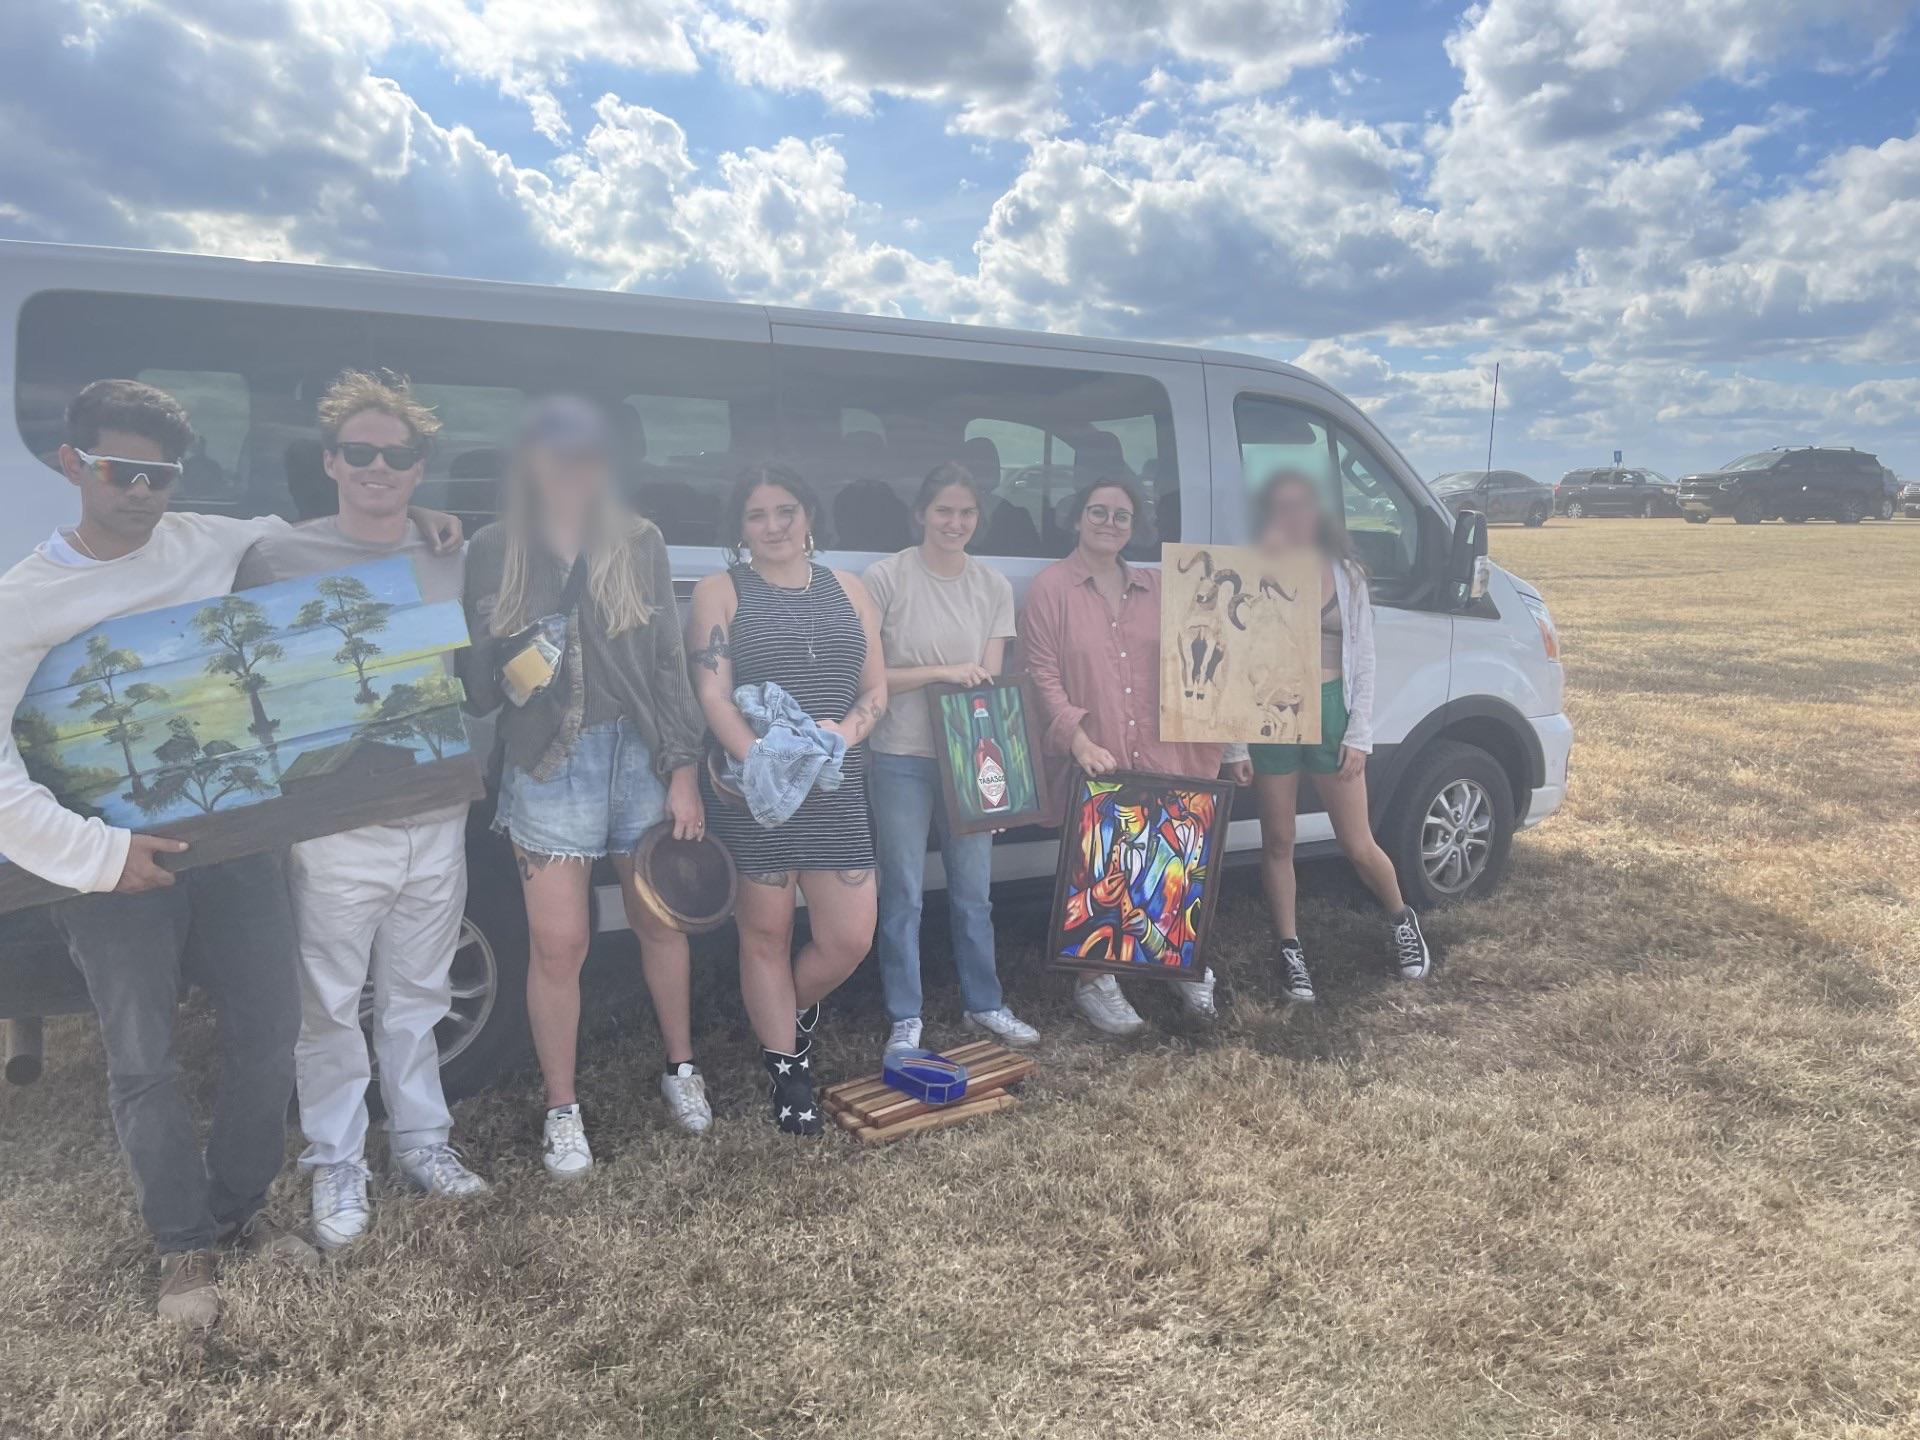 Group photo of TRC members holding artwork in front of van at the 2022 Angola Rodeo Show